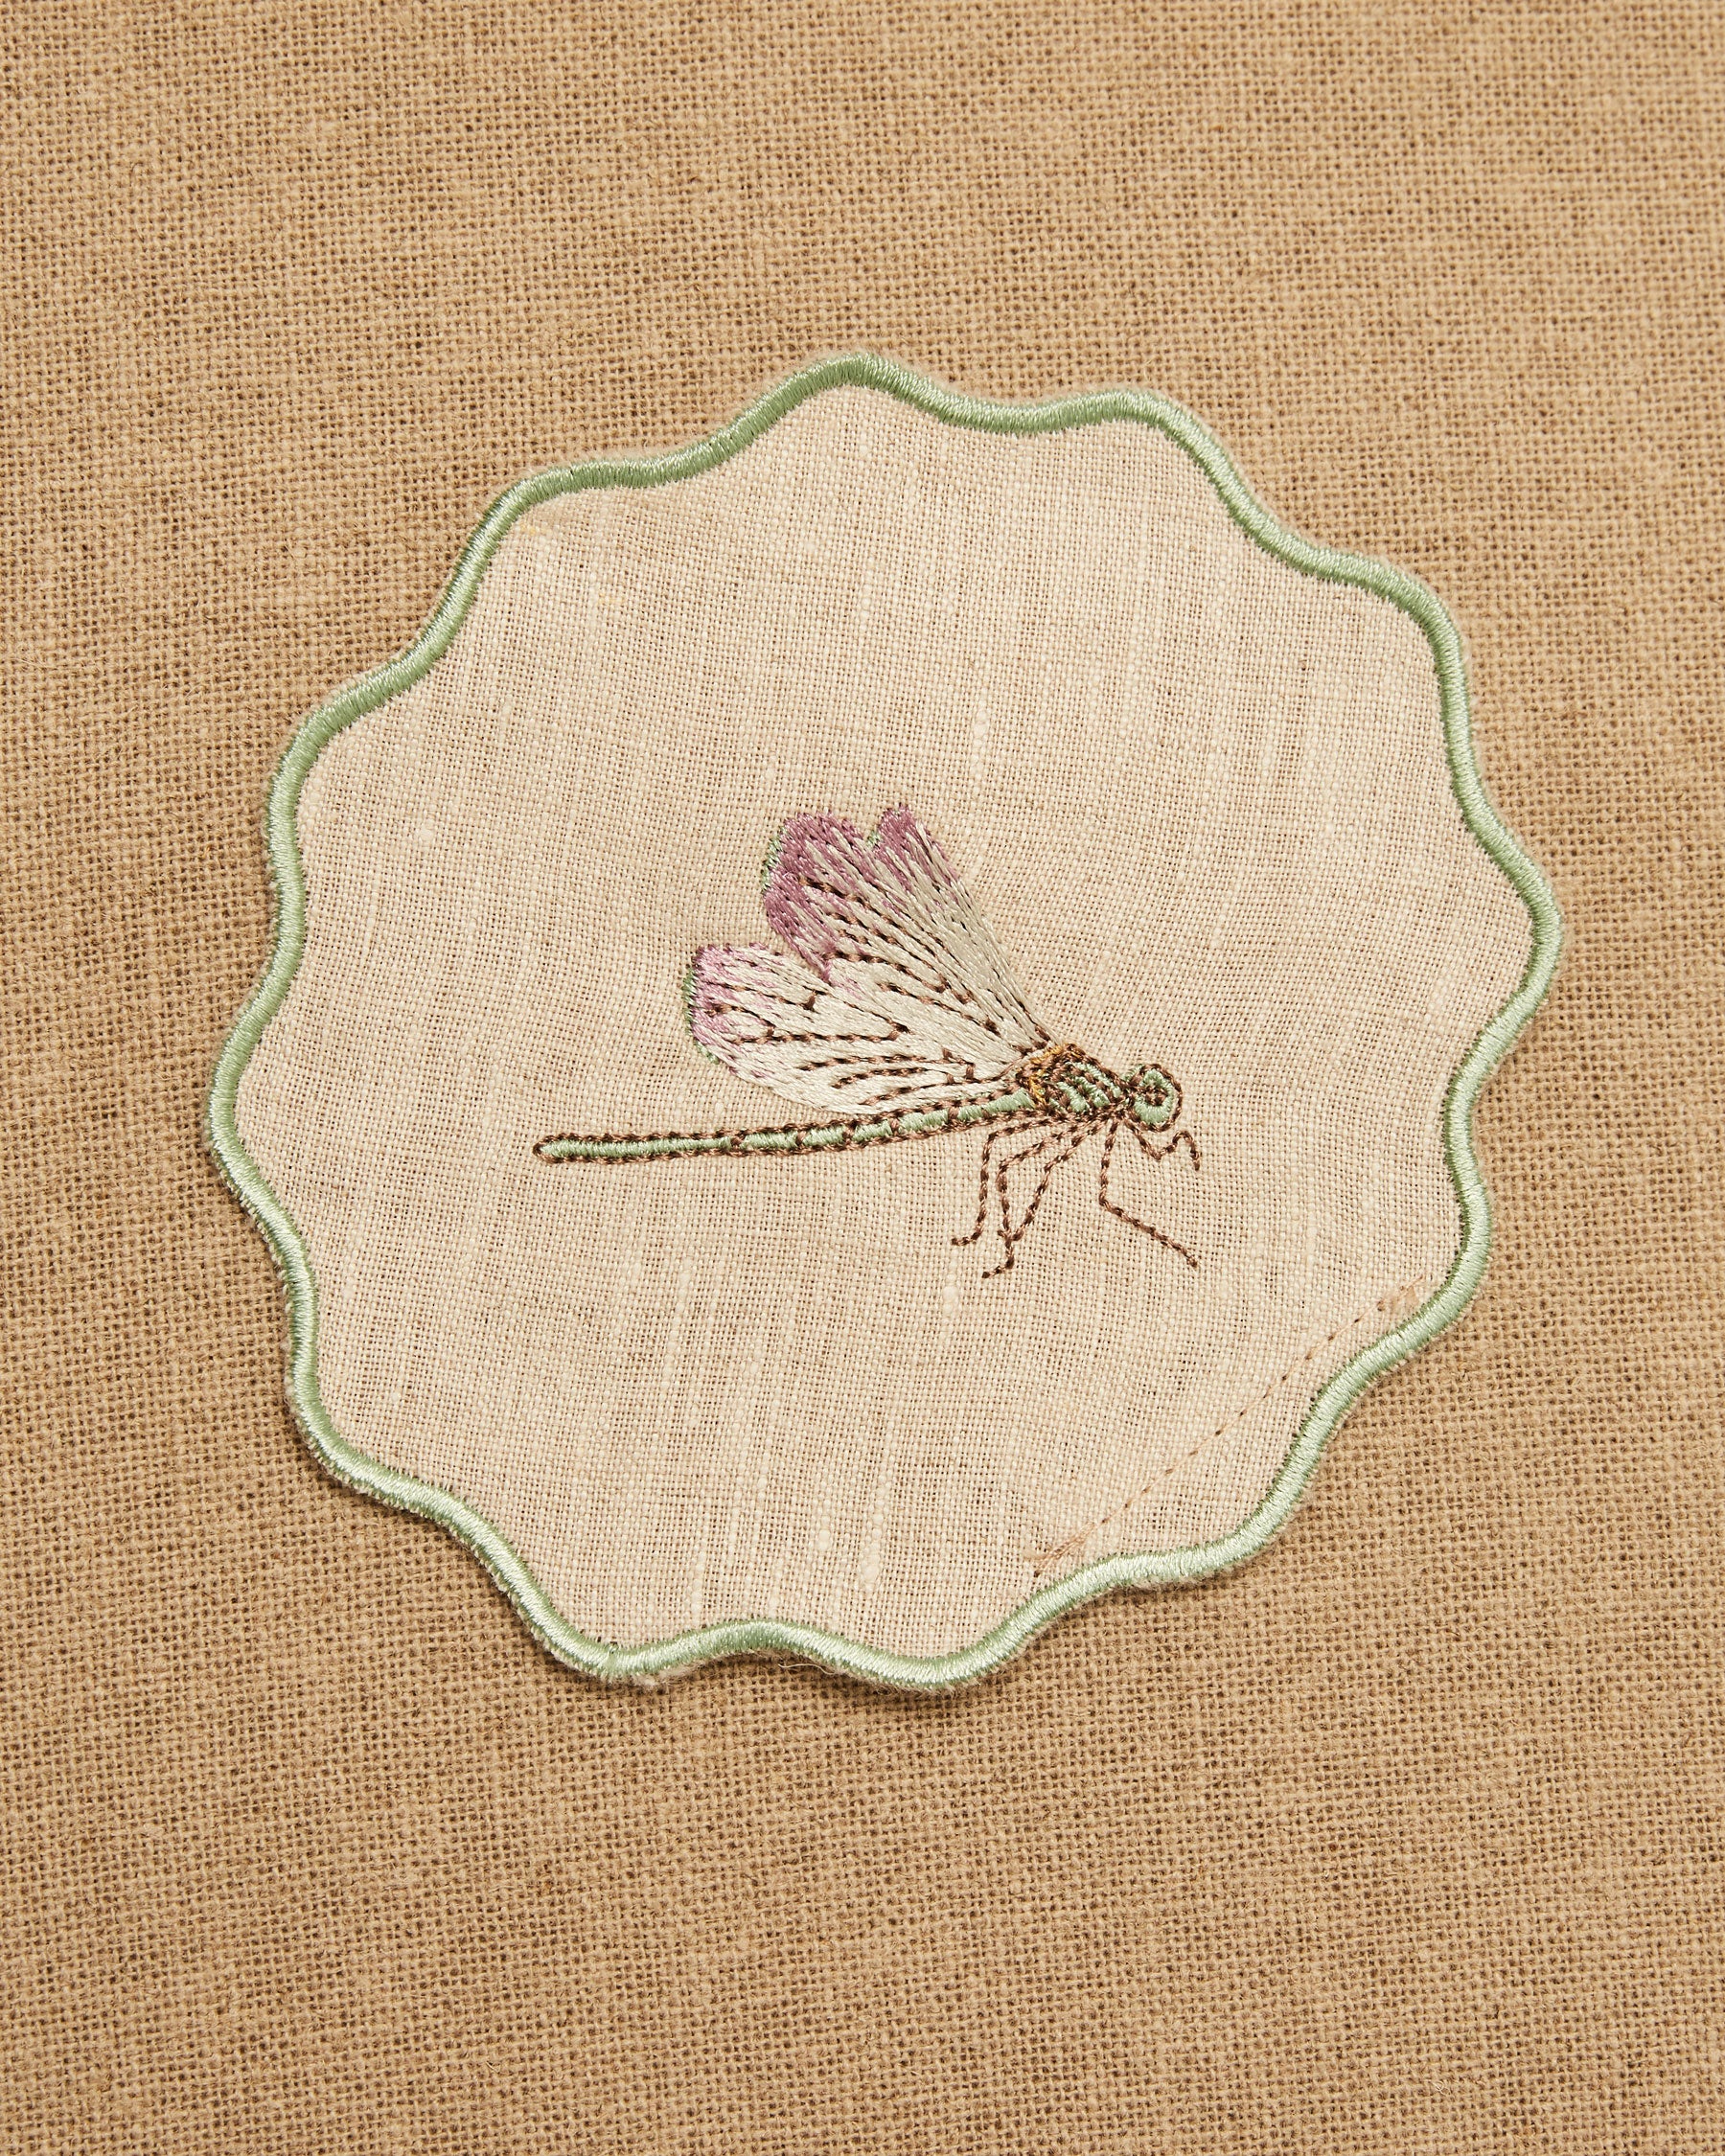 Hand Embroidered Dragonfly Coaster | The Gray Box